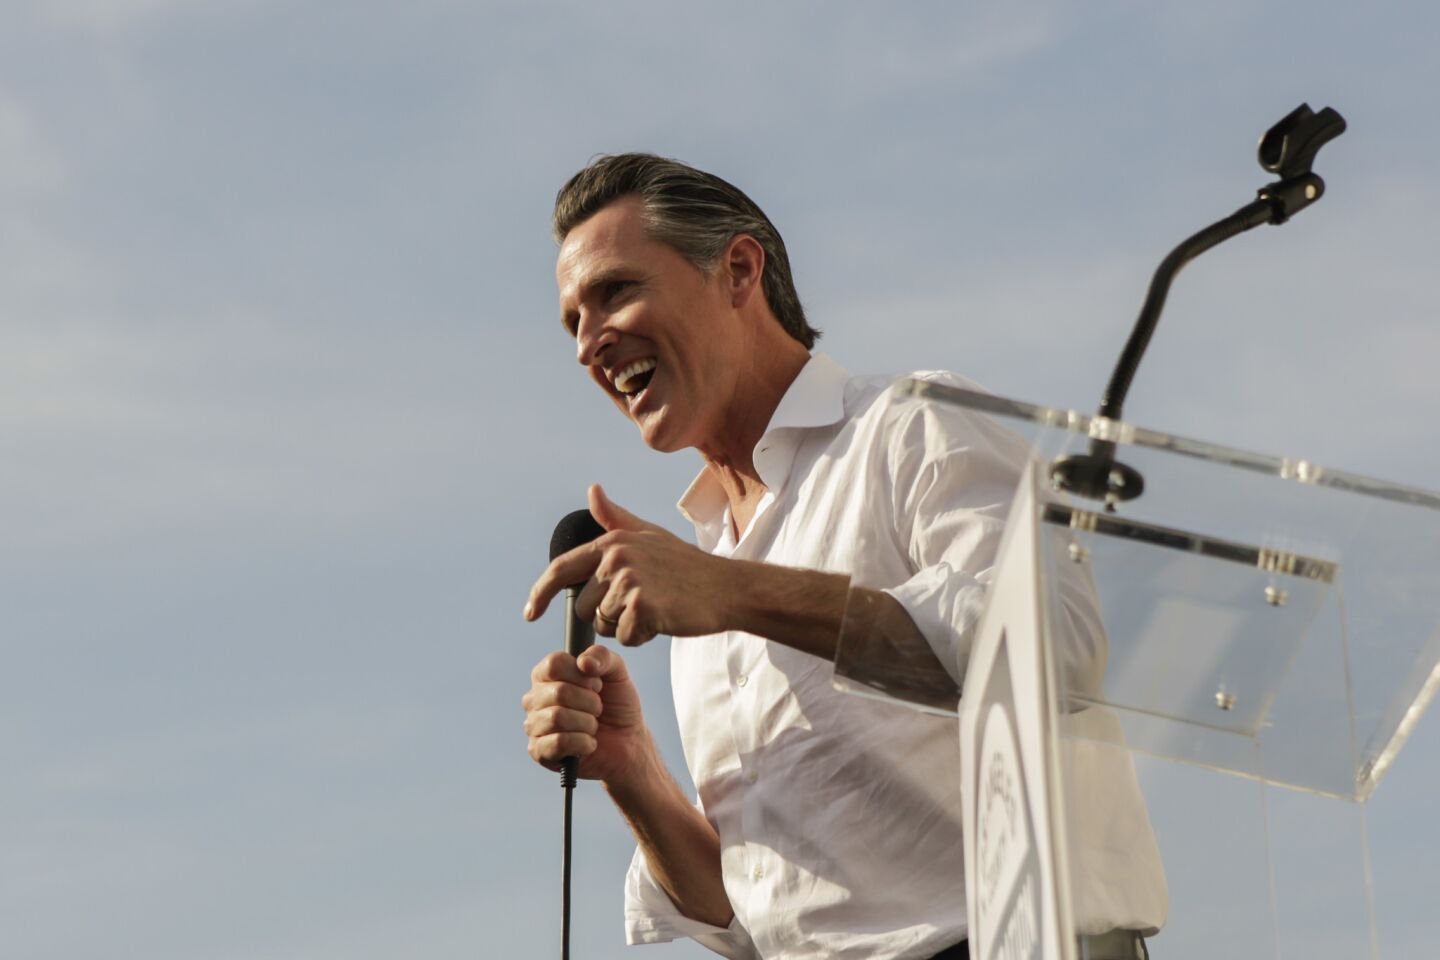 Democratic gubernatorial candidate Gavin Newsom joined more than 100 members of over a dozen local unions — including, nurses, janitors, grocery store workers and security officers — at a get-out-the-vote rally Sunday.